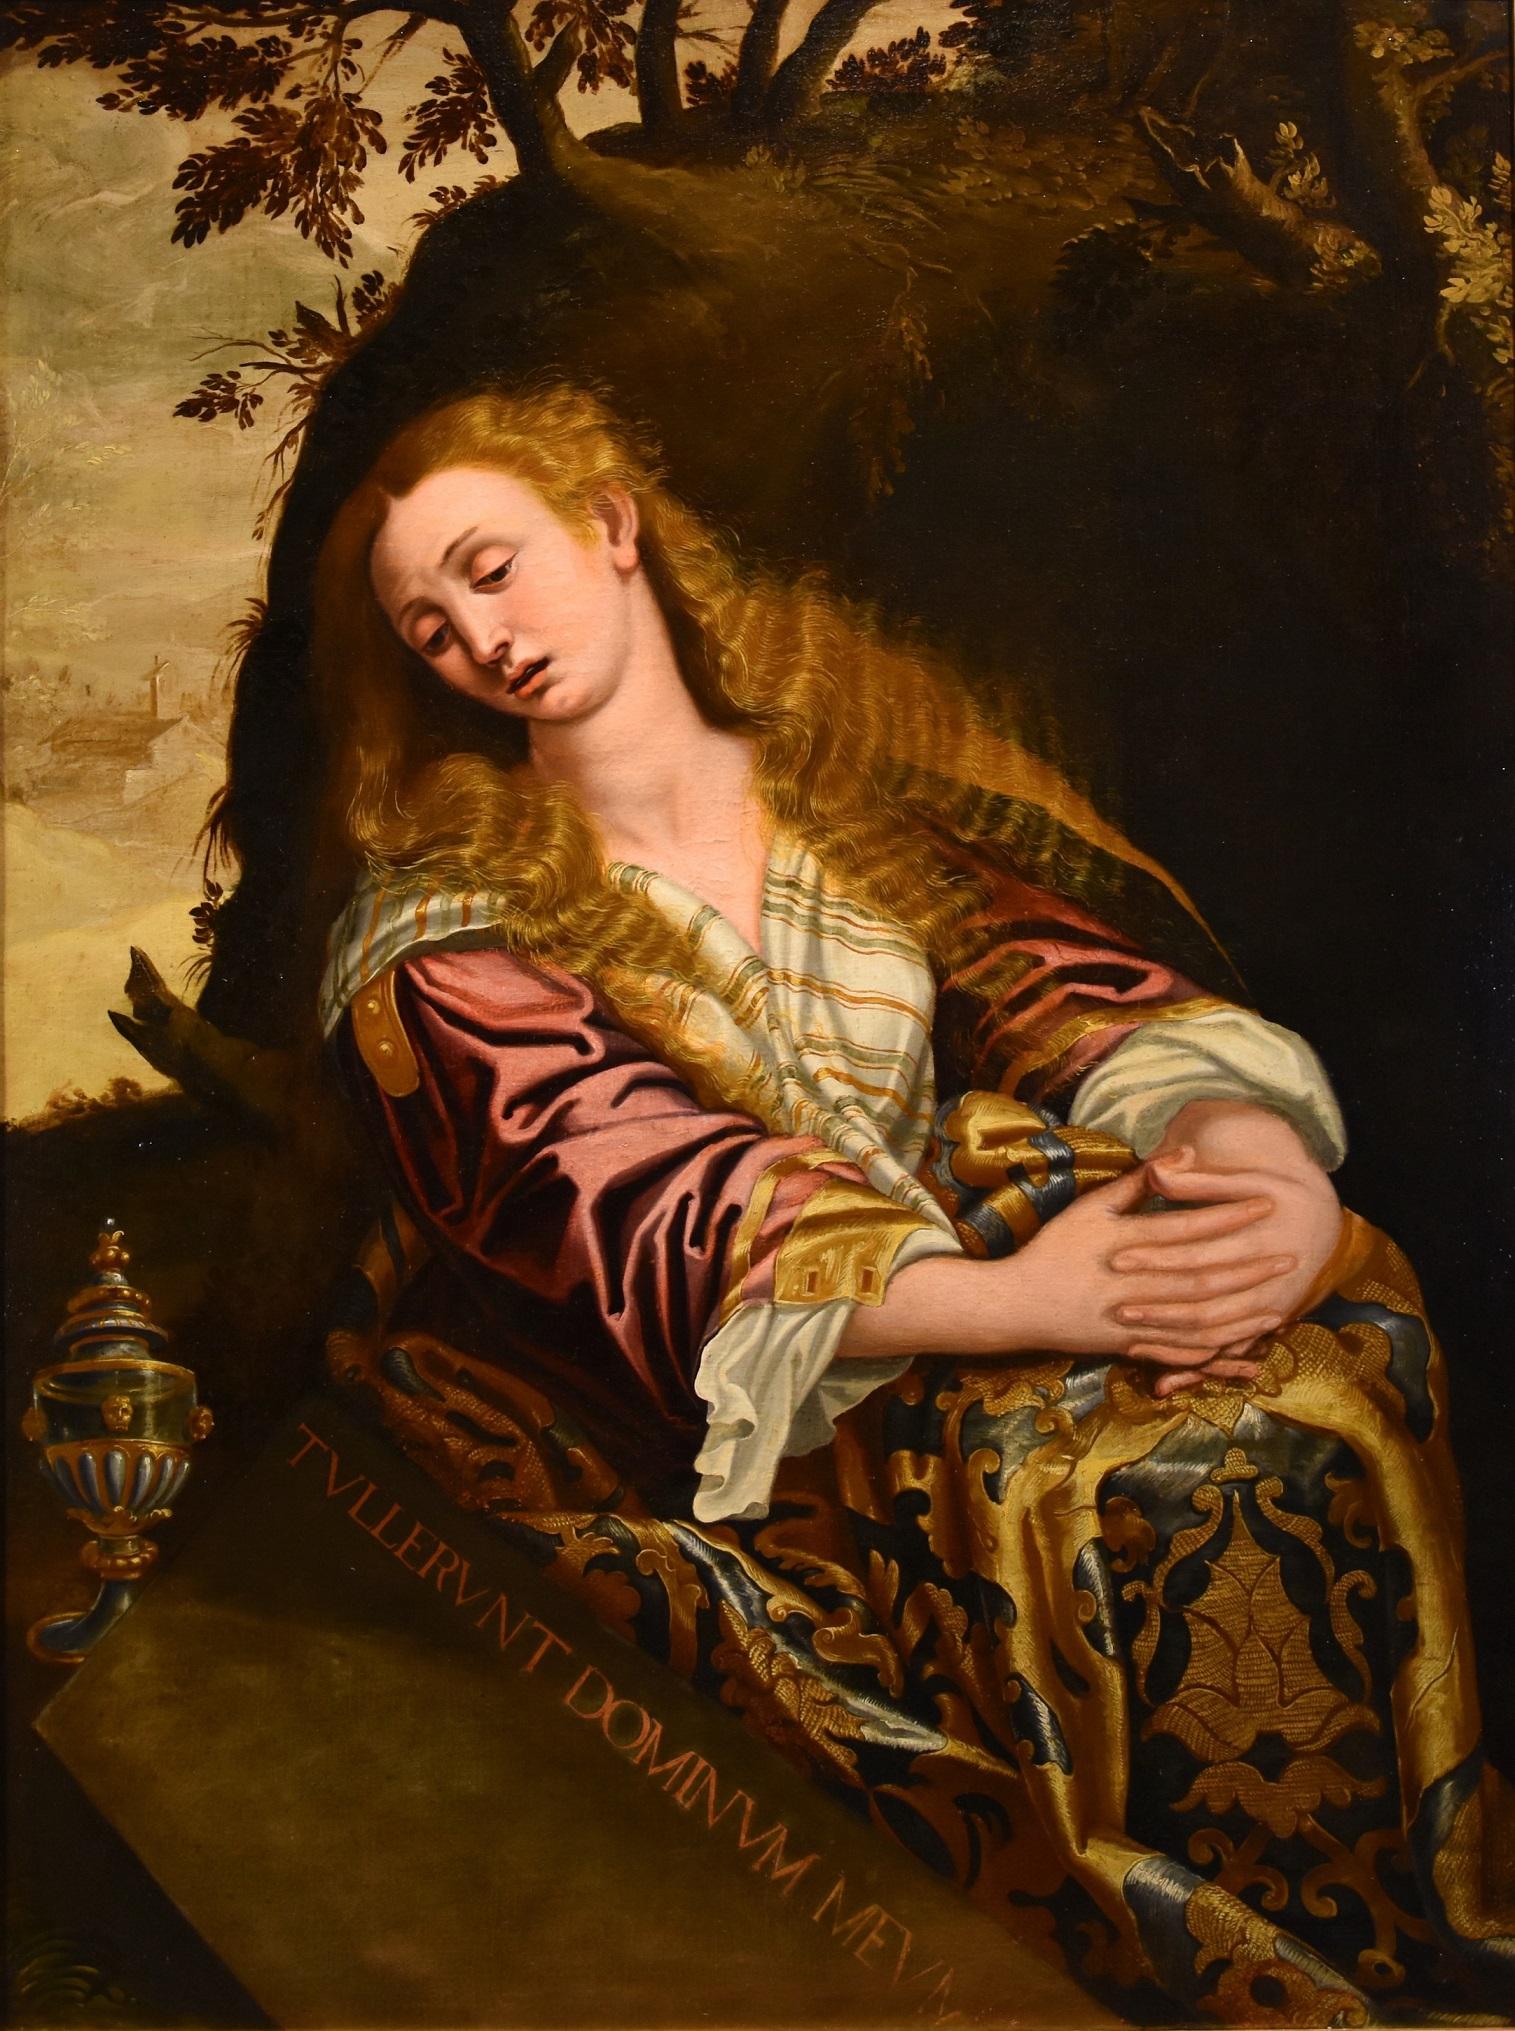 Scipione Pulzone, known as Il Gaetano (Gaeta, 1544 - Rome, 1598) workshop of Portrait Painting - Mary Magdalena Pulzone Paint oil on canvas 17th Century Old master Portrait Art 